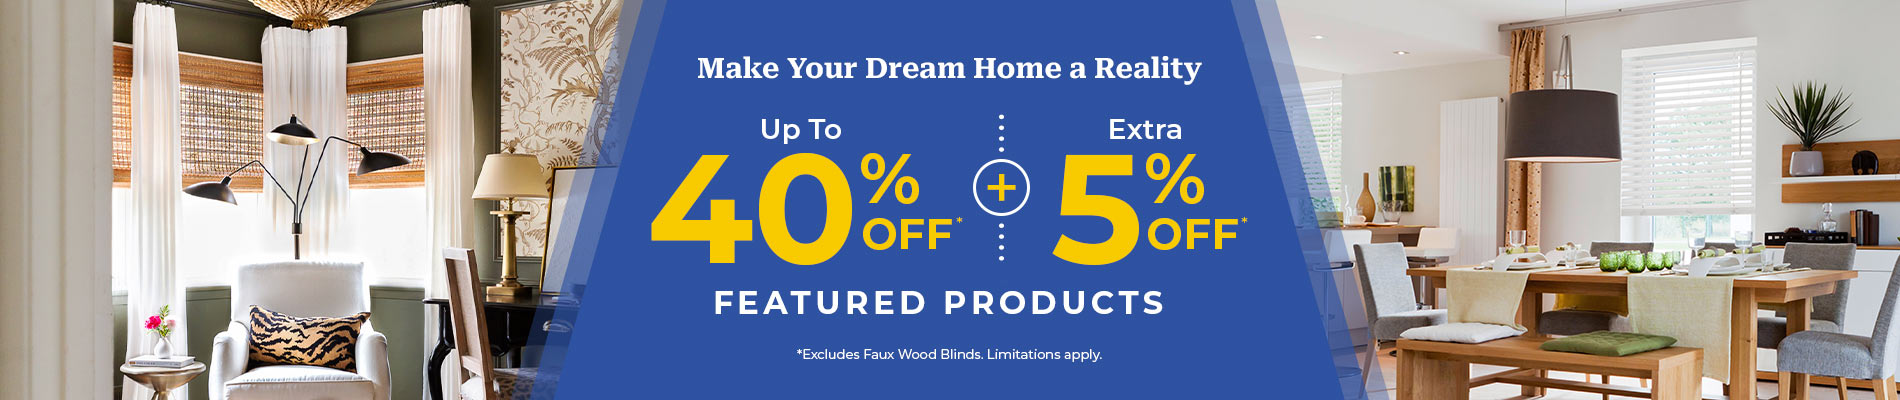 Up To 40% Off* + Extra 5% Off Featured Products* (*Excludes Faux Wood Blinds)